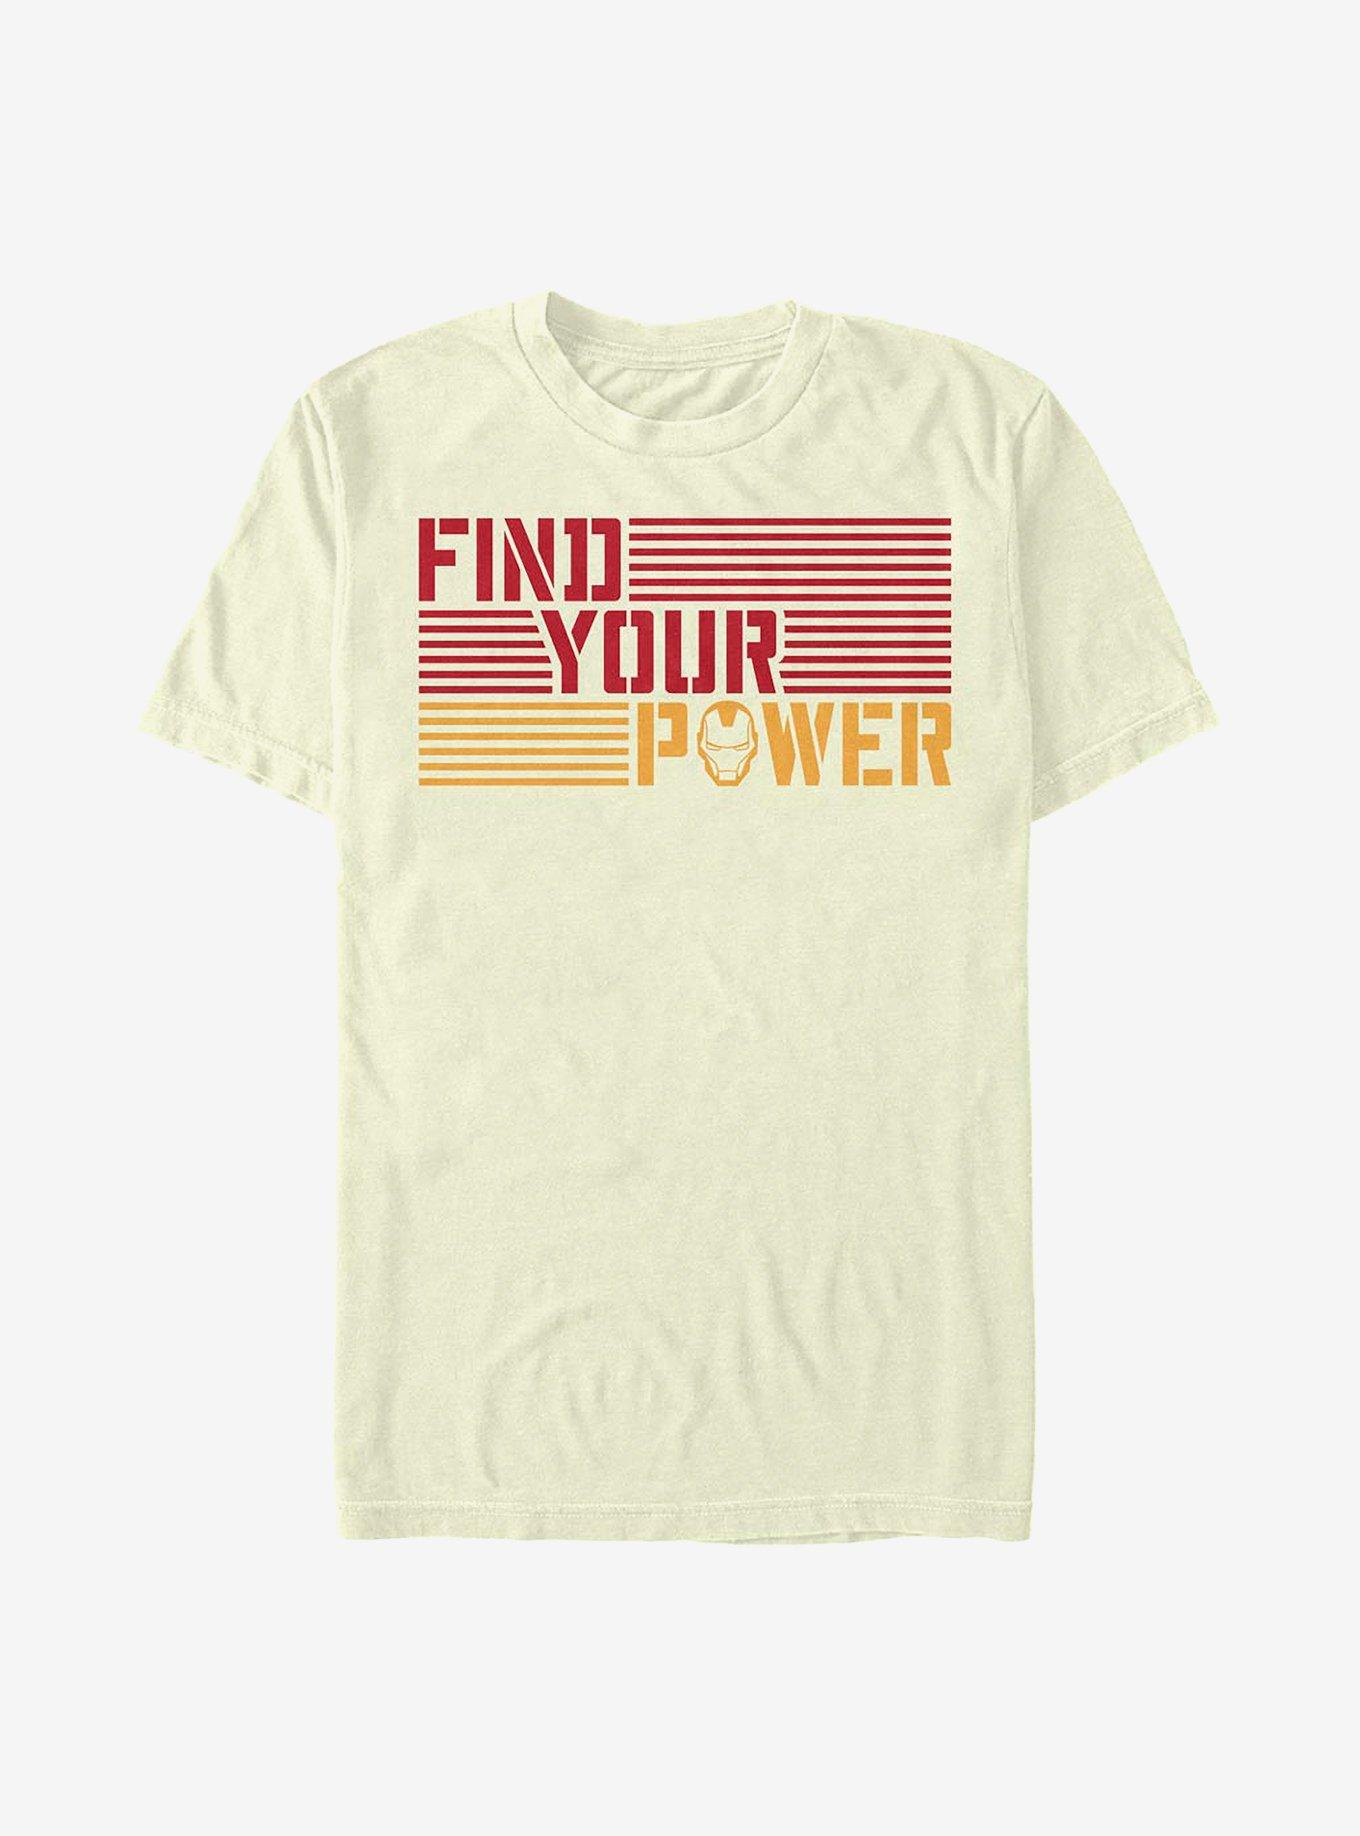 Marvel Iron Man Find Your Power T-Shirt, NATURAL, hi-res